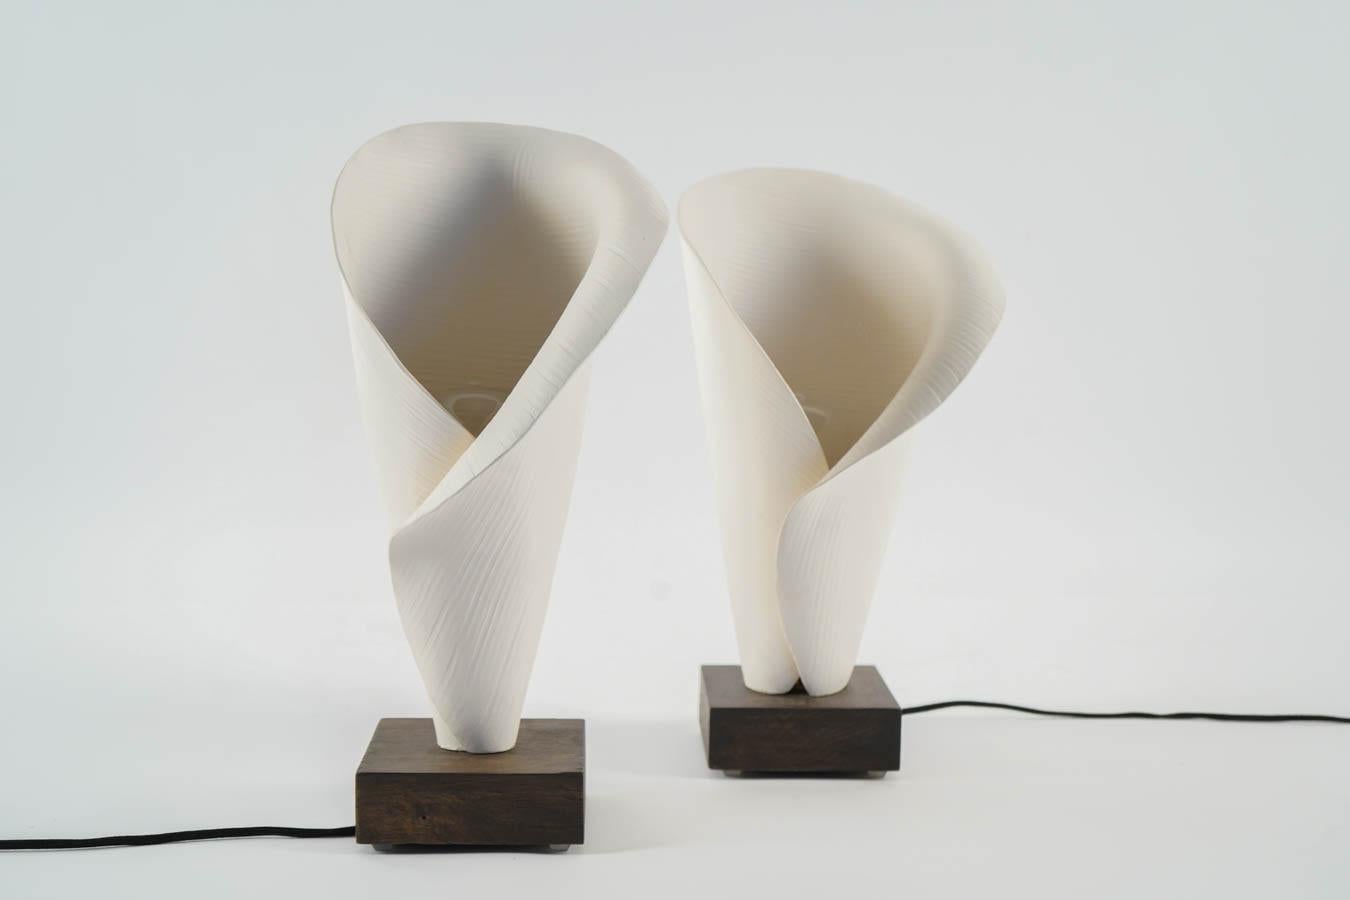 Modern Pair of Table Lamps, White Ceramic Lamp Made by Hand Mounted on Solid Oak